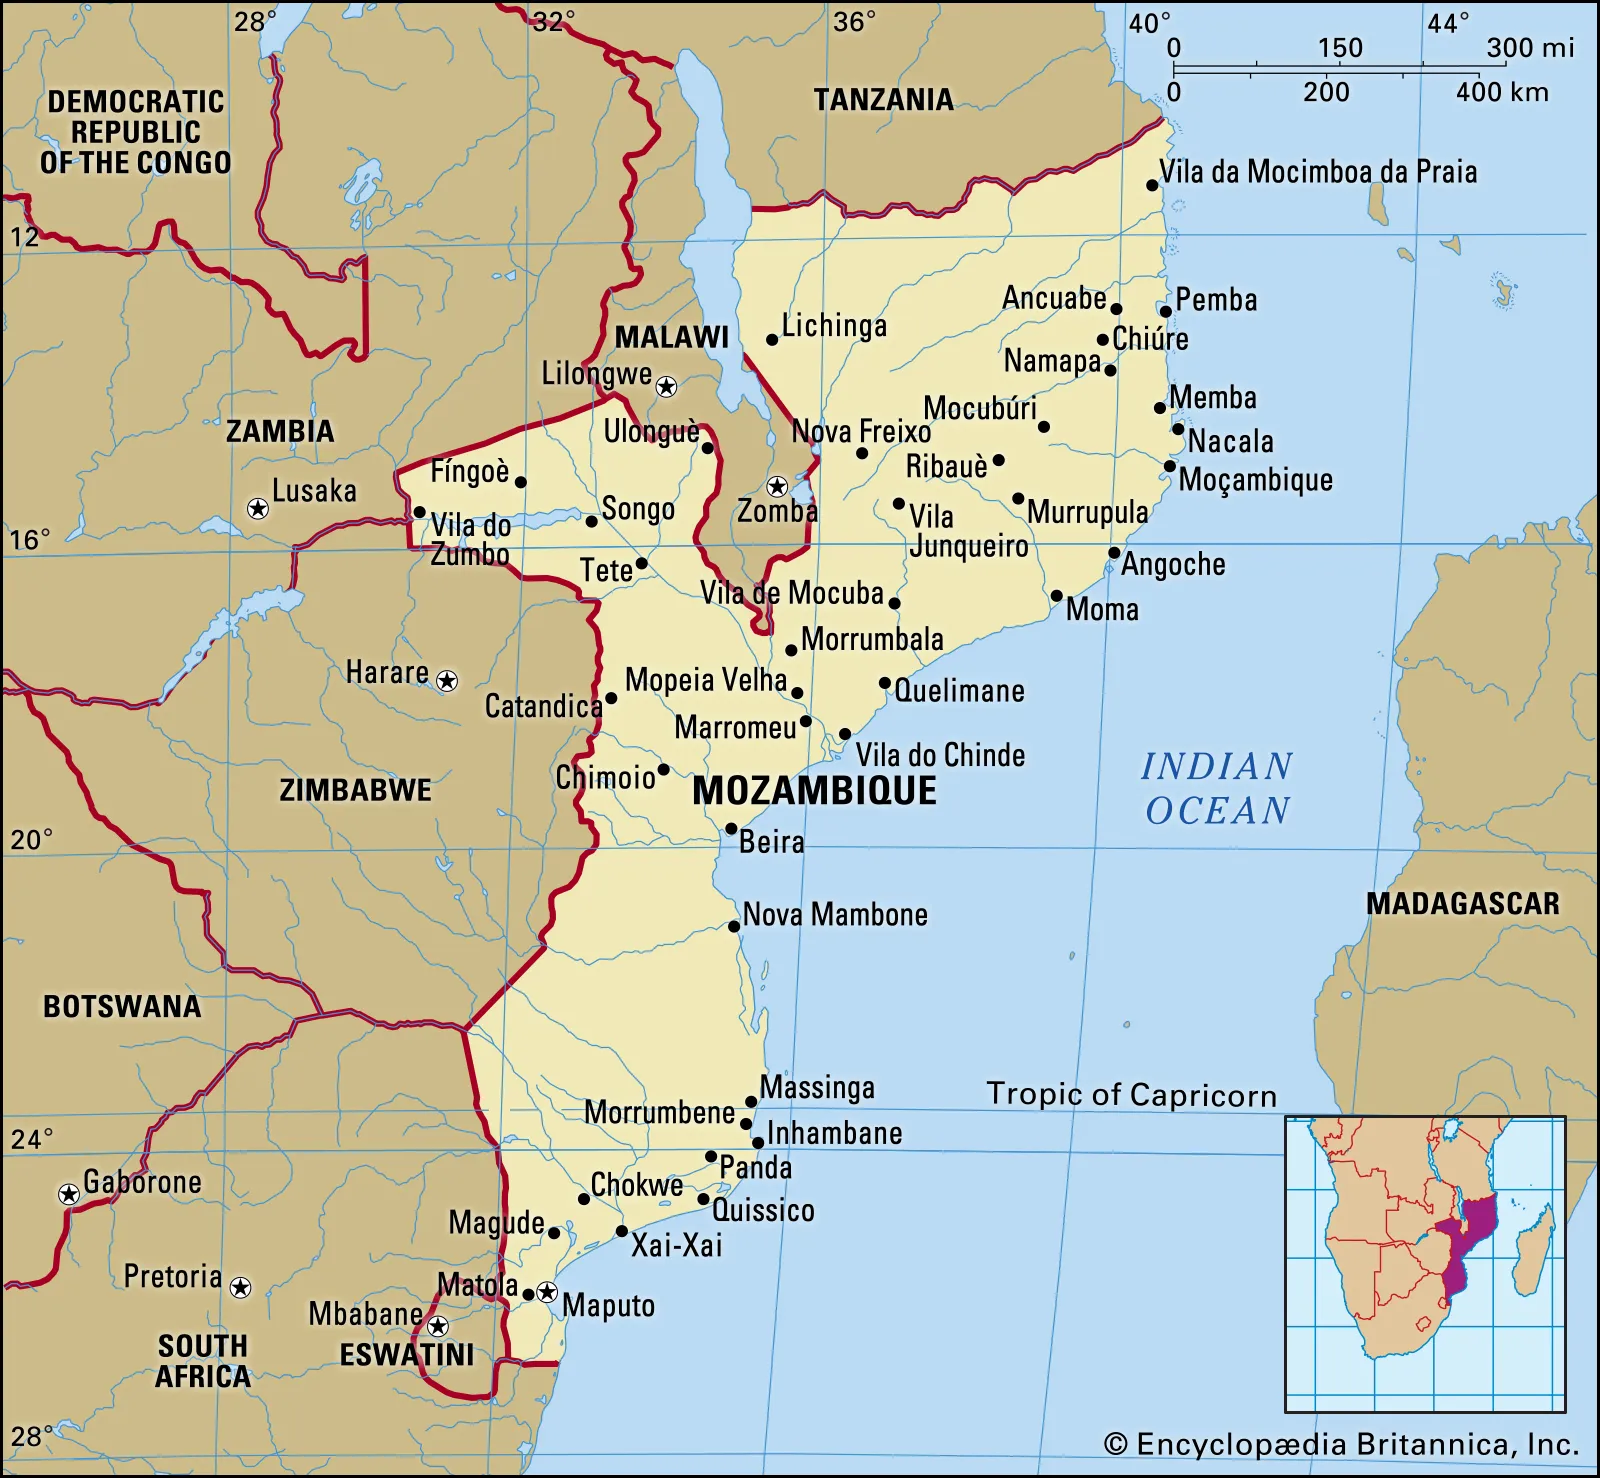 Mozambique Eyes Central Role in Southern African Power Network. (Photo Internet reproduction)